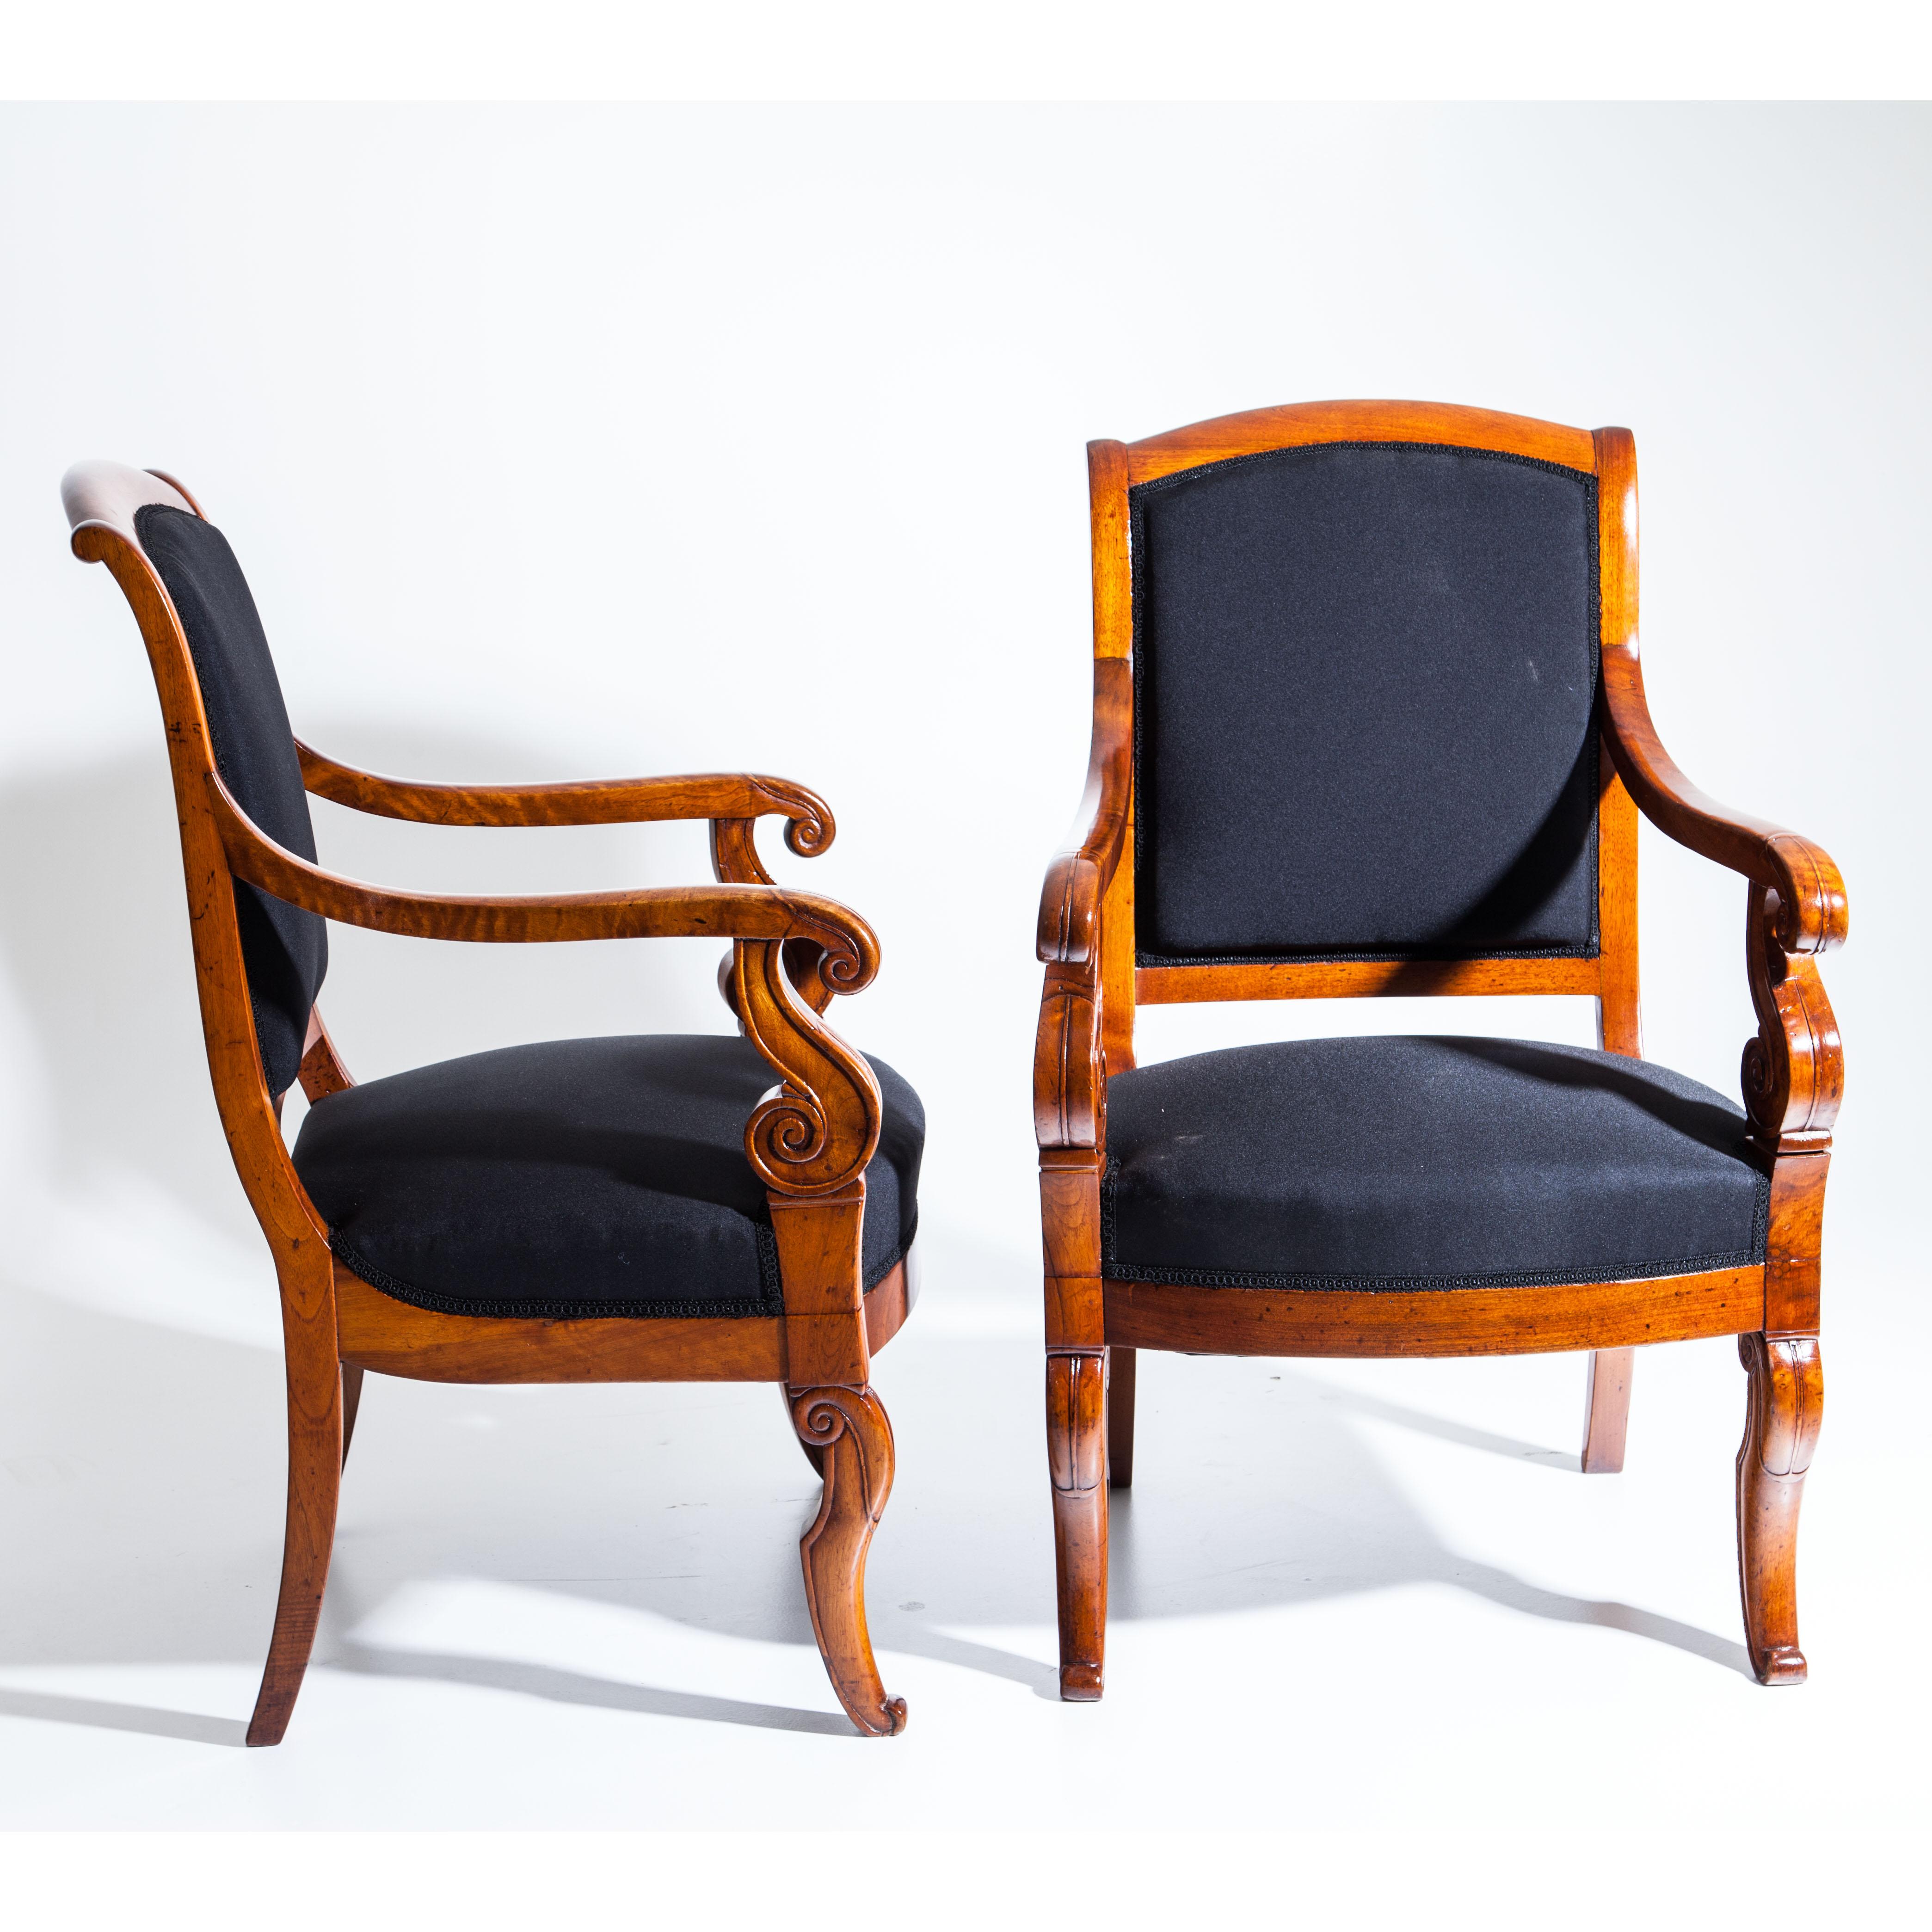 Pair of Cherrywood Armchairs, France, First Half of the 19th Century 2